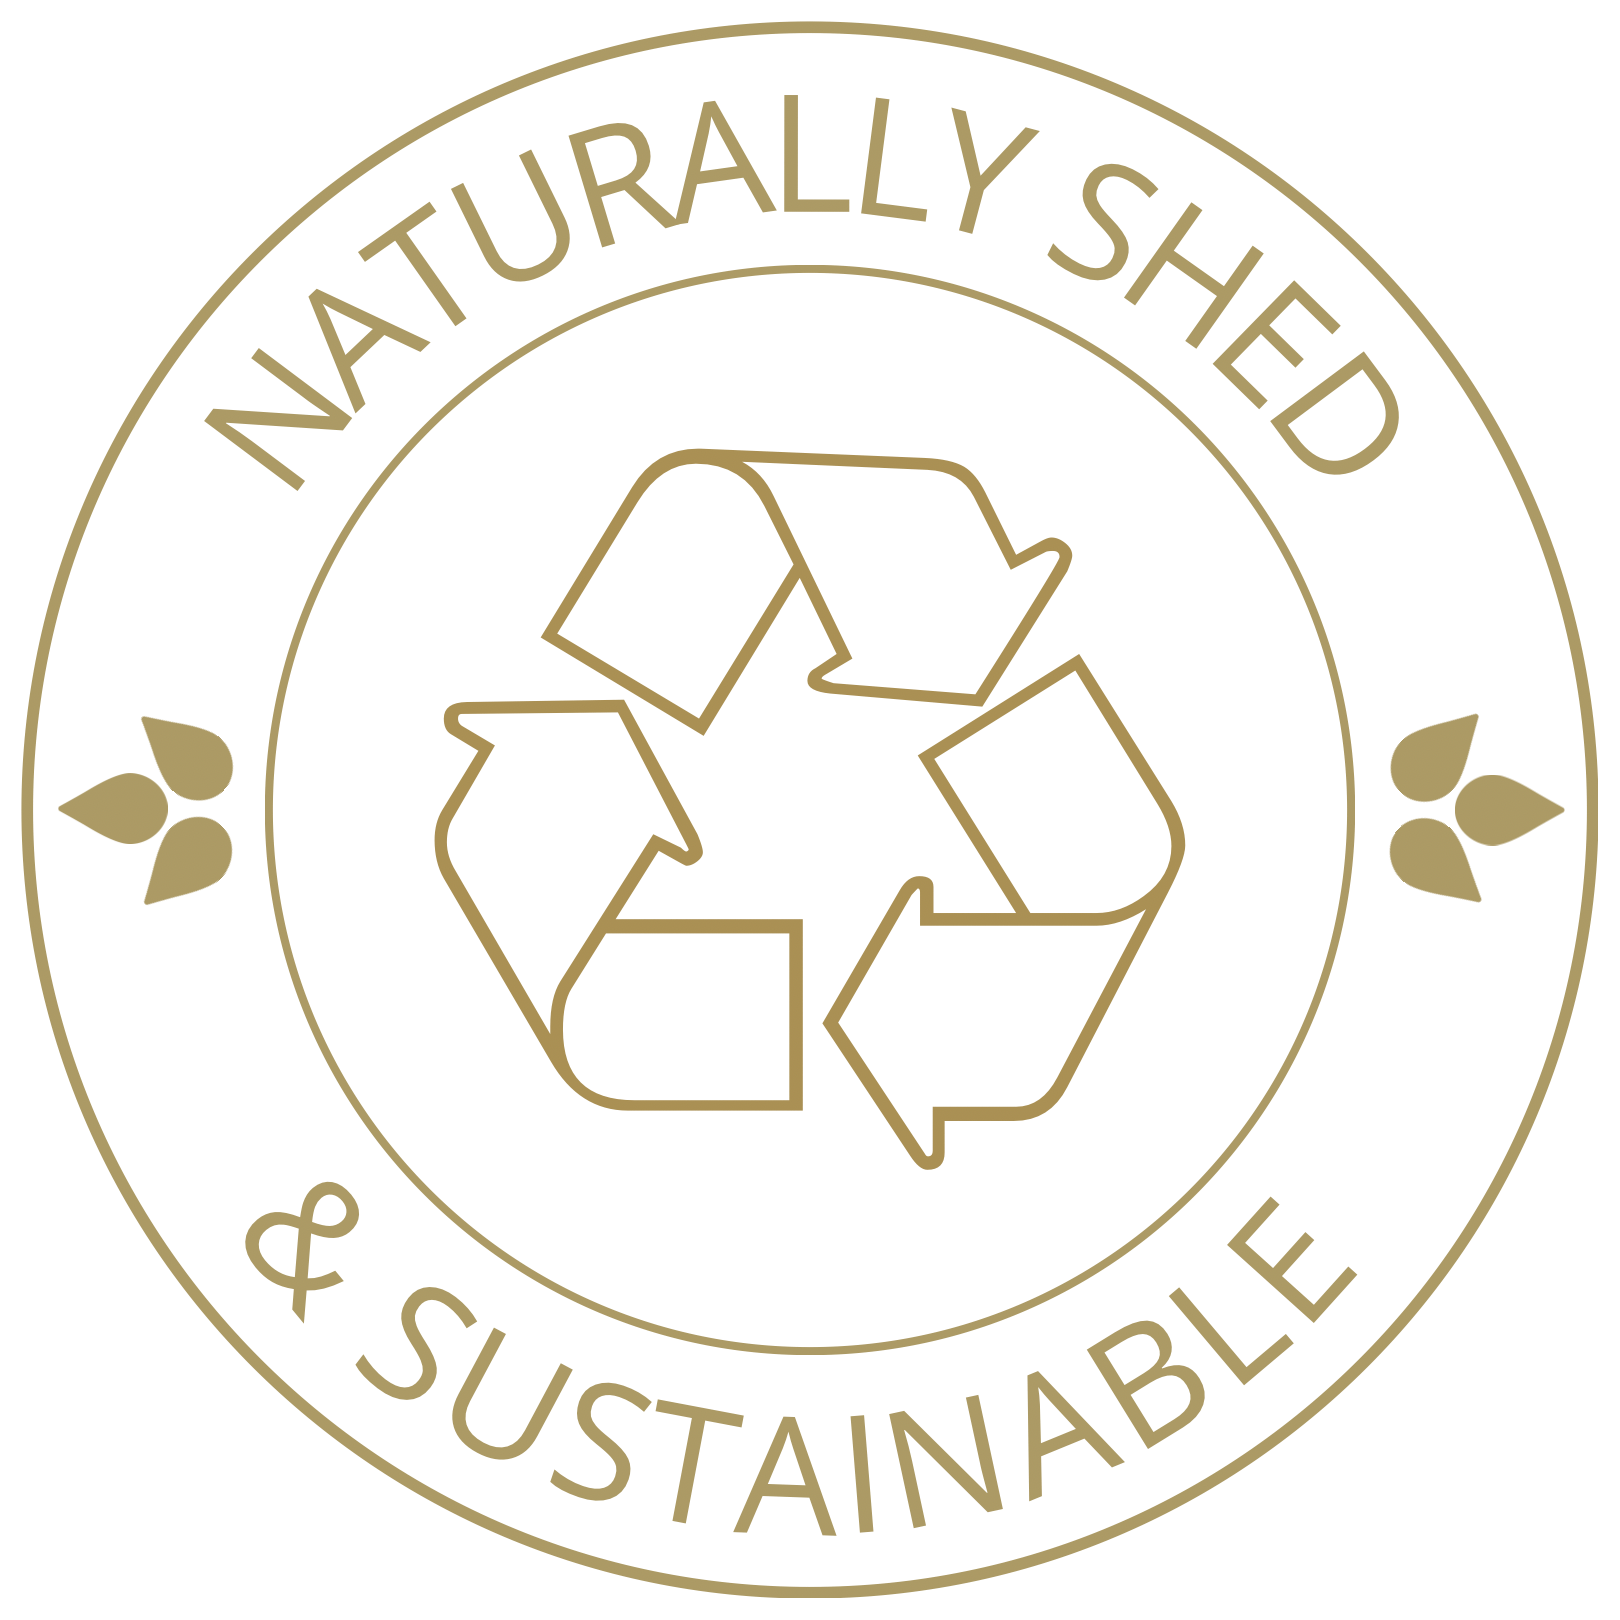 Naturally Shed & Sustainable